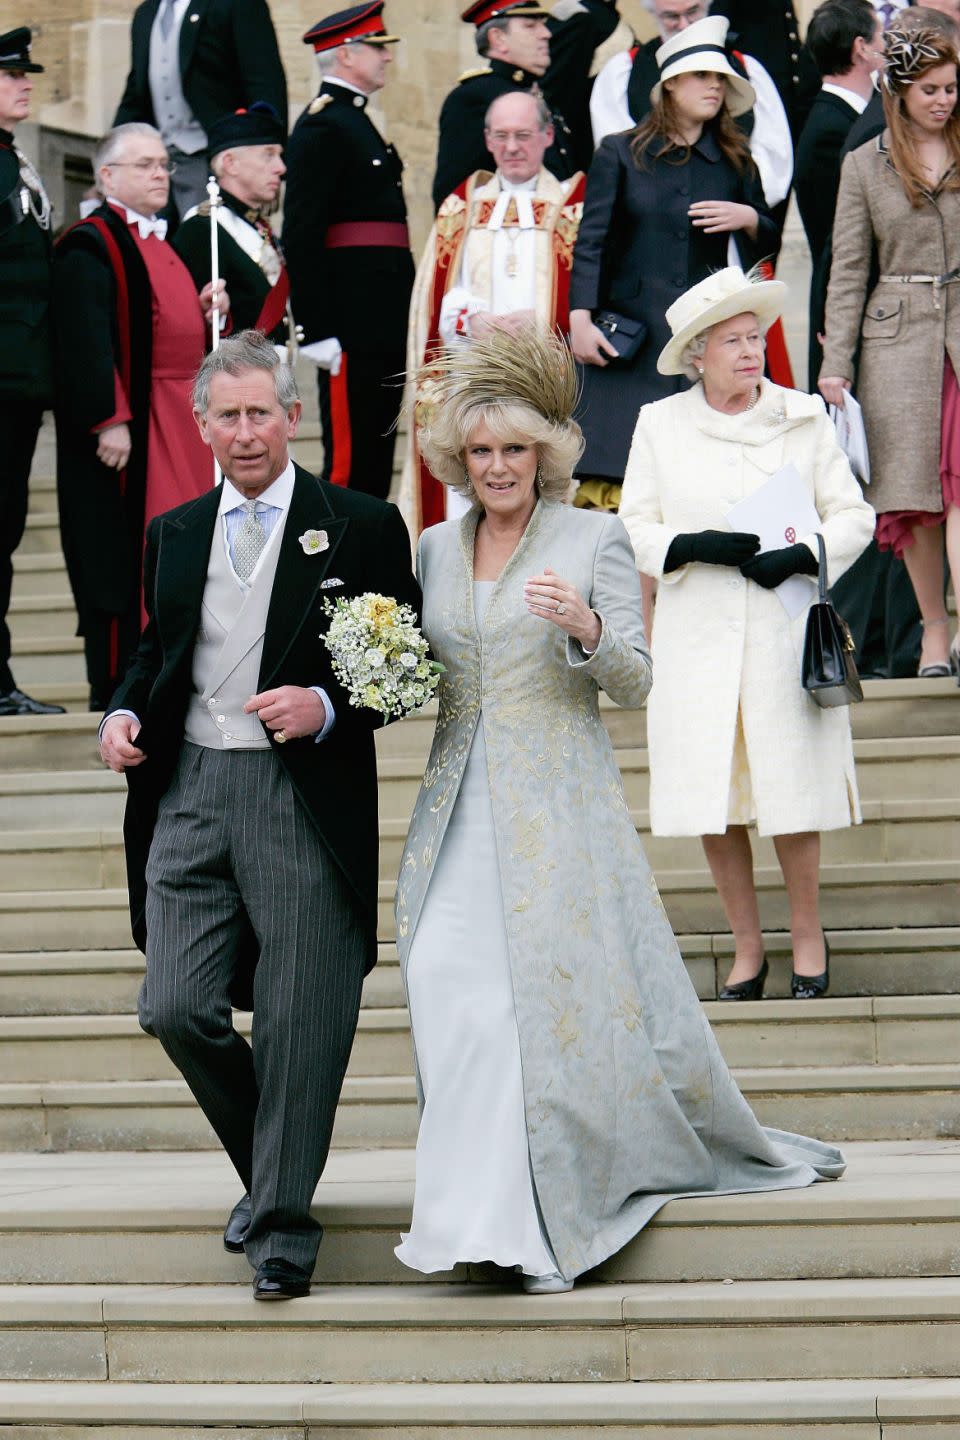 The Queen is pictured here on Prince Charles and Camilla's wedding day in 2005. Photo: Getty Images